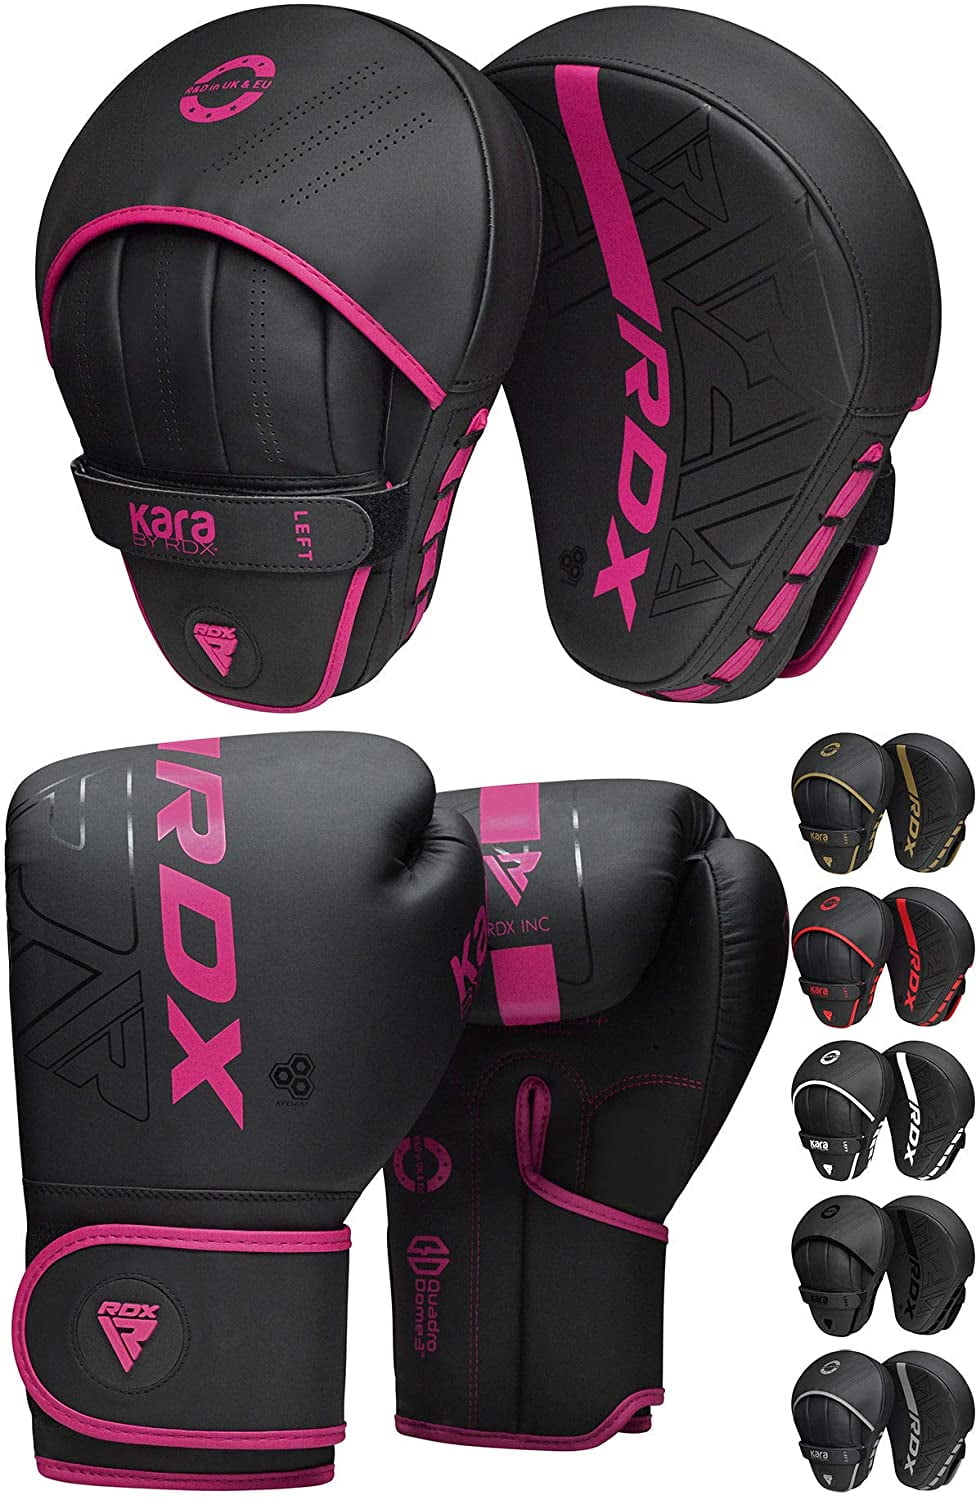 Boxing Focus Pads Hook and Jab Kick MMA Training Punching Gloves Curved Pair UK 